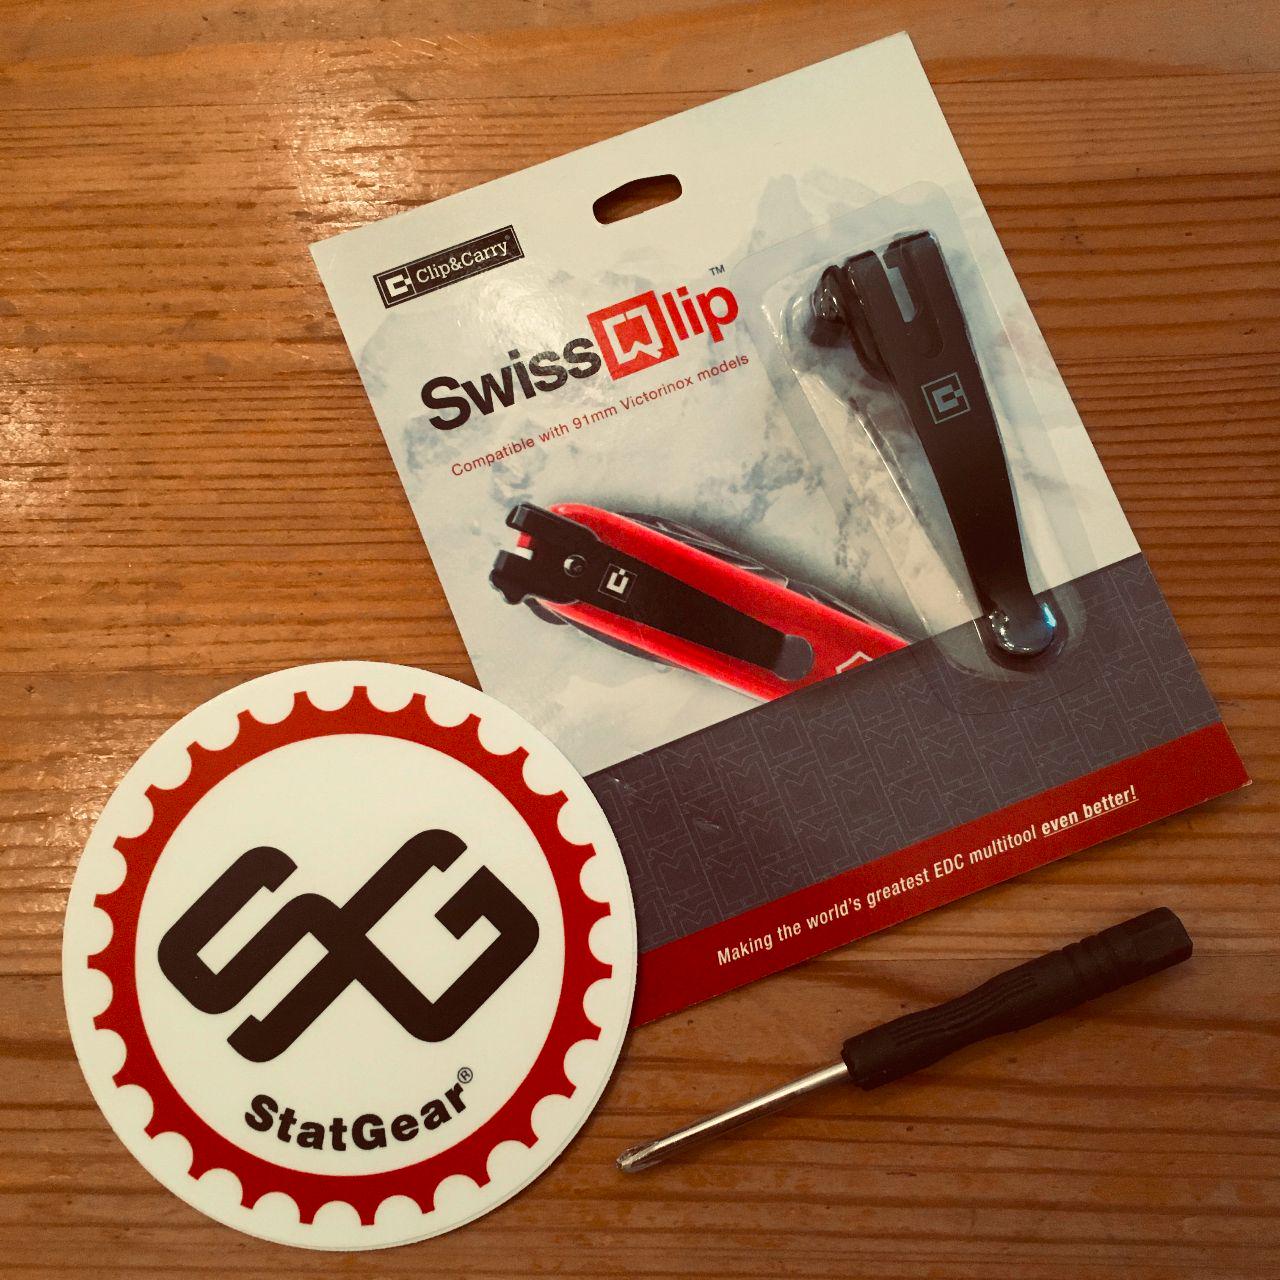 SwissQlip Packaging, accessories and sticker